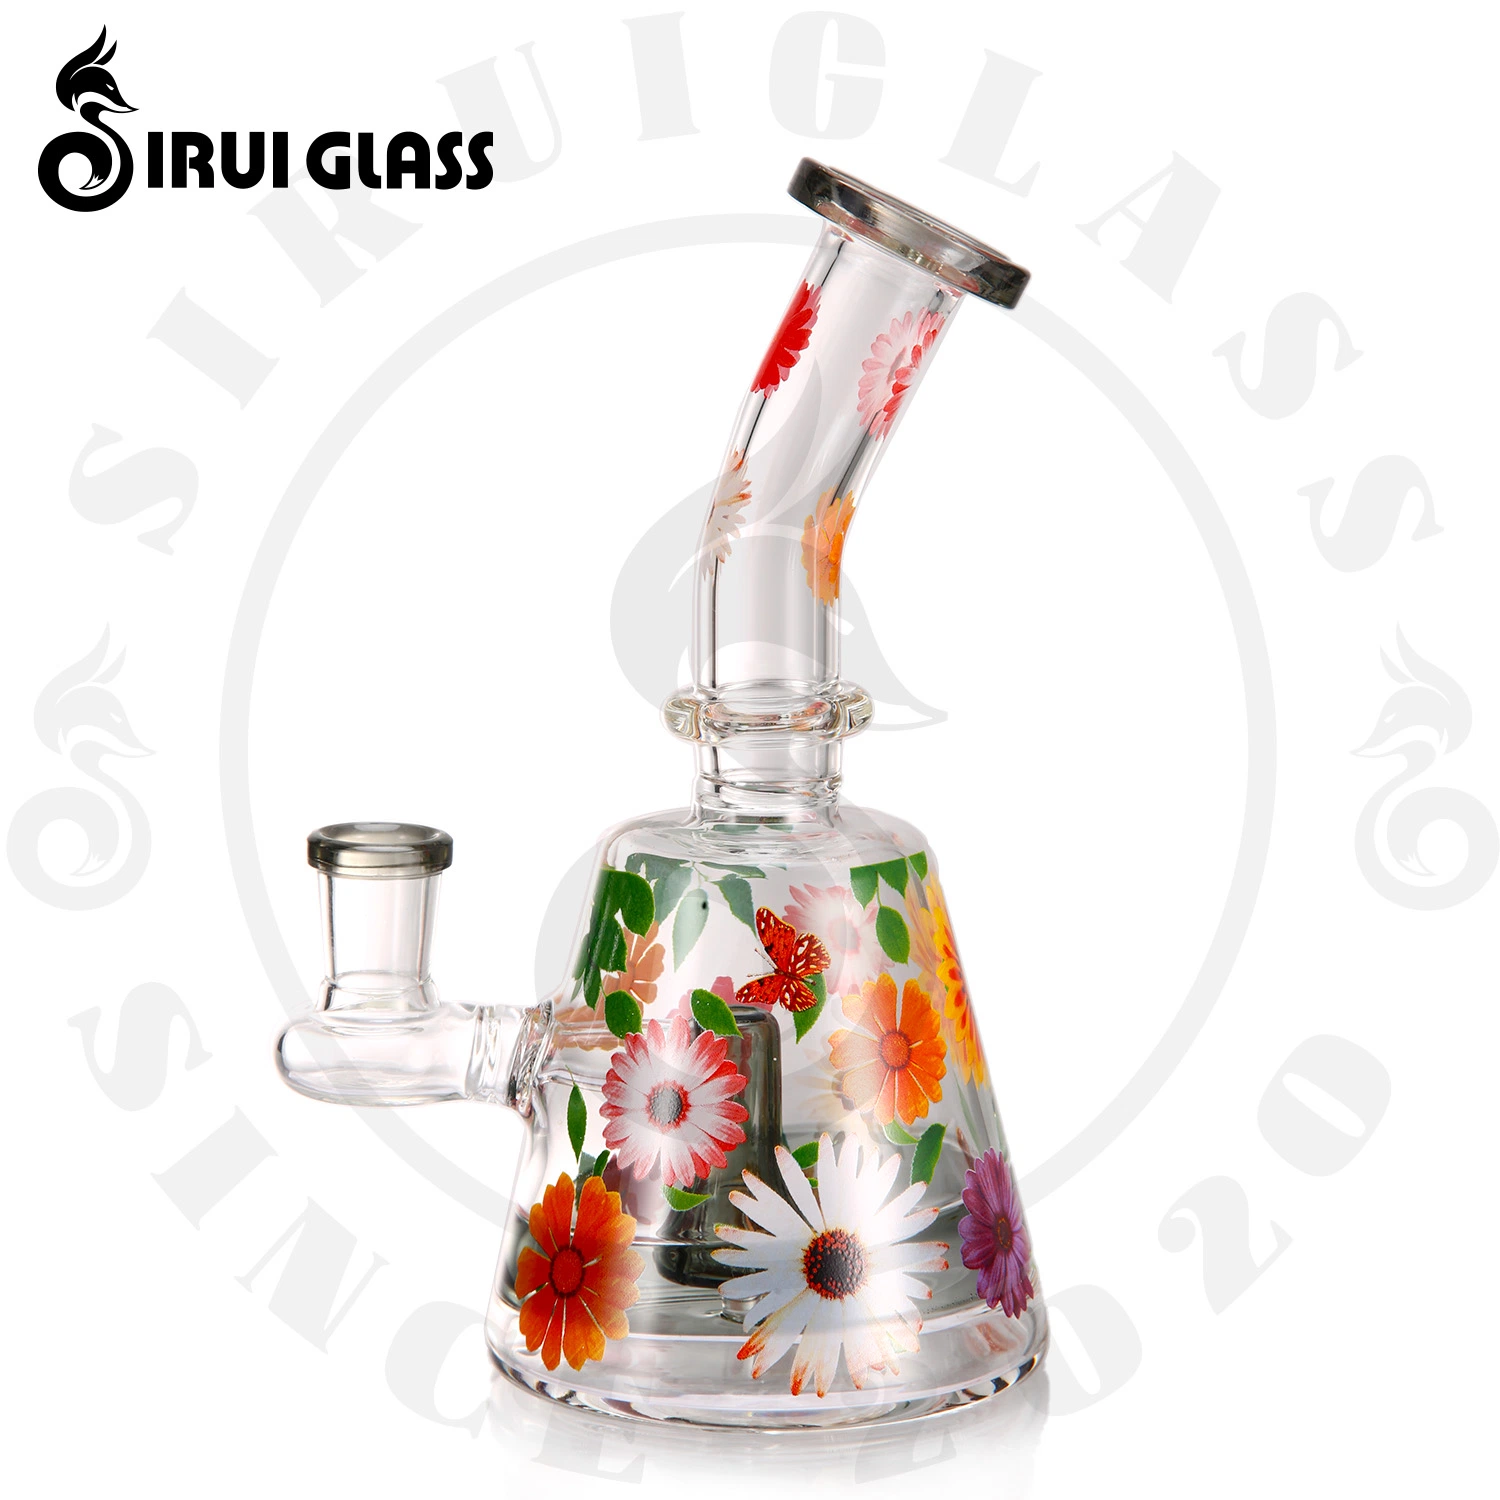 2023 China Wholesale/Supplier 7.1 Inches Glass Smoking Water Pipe Sunflower Daisy Decal Shisha Hookah Glass Oil Burner Pipe Shower Perc DAB Rig Smoking Pipe